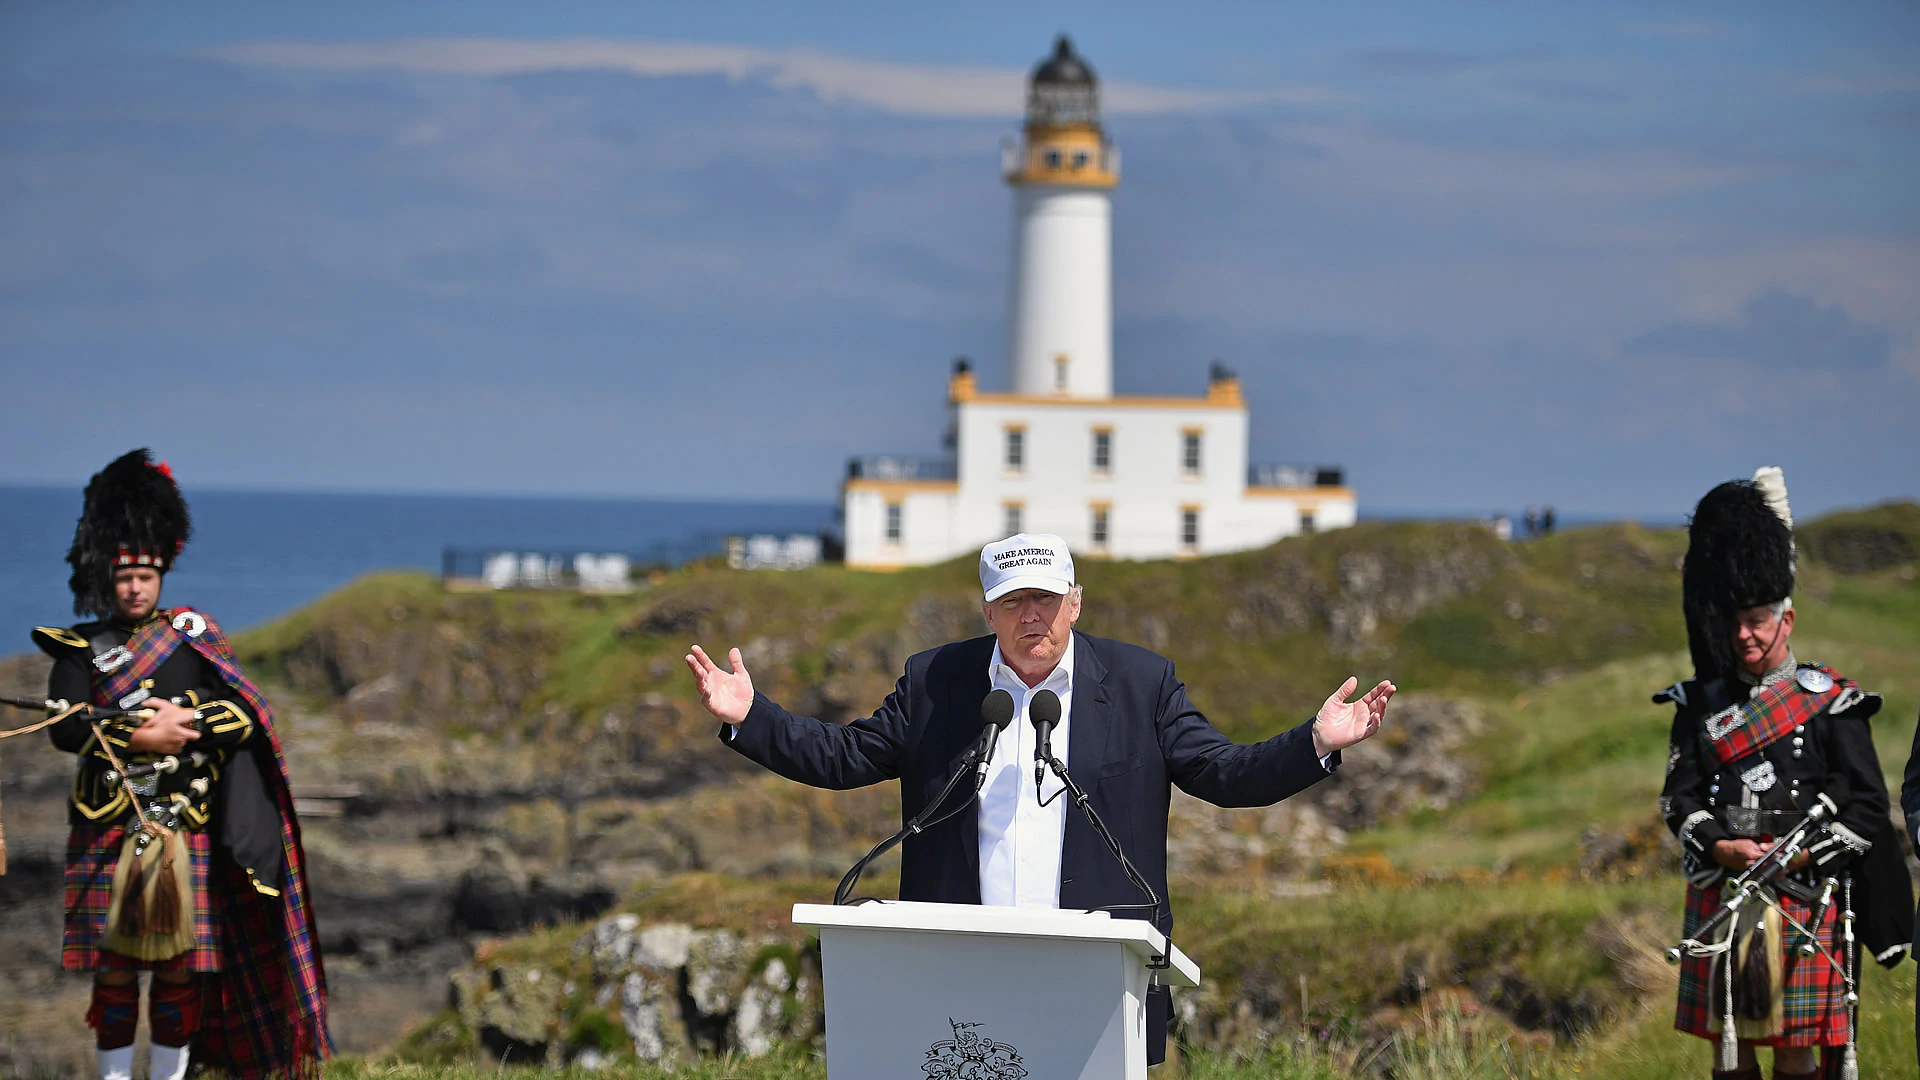 Slumbers: Trump Turnberry Open would be 'complex'